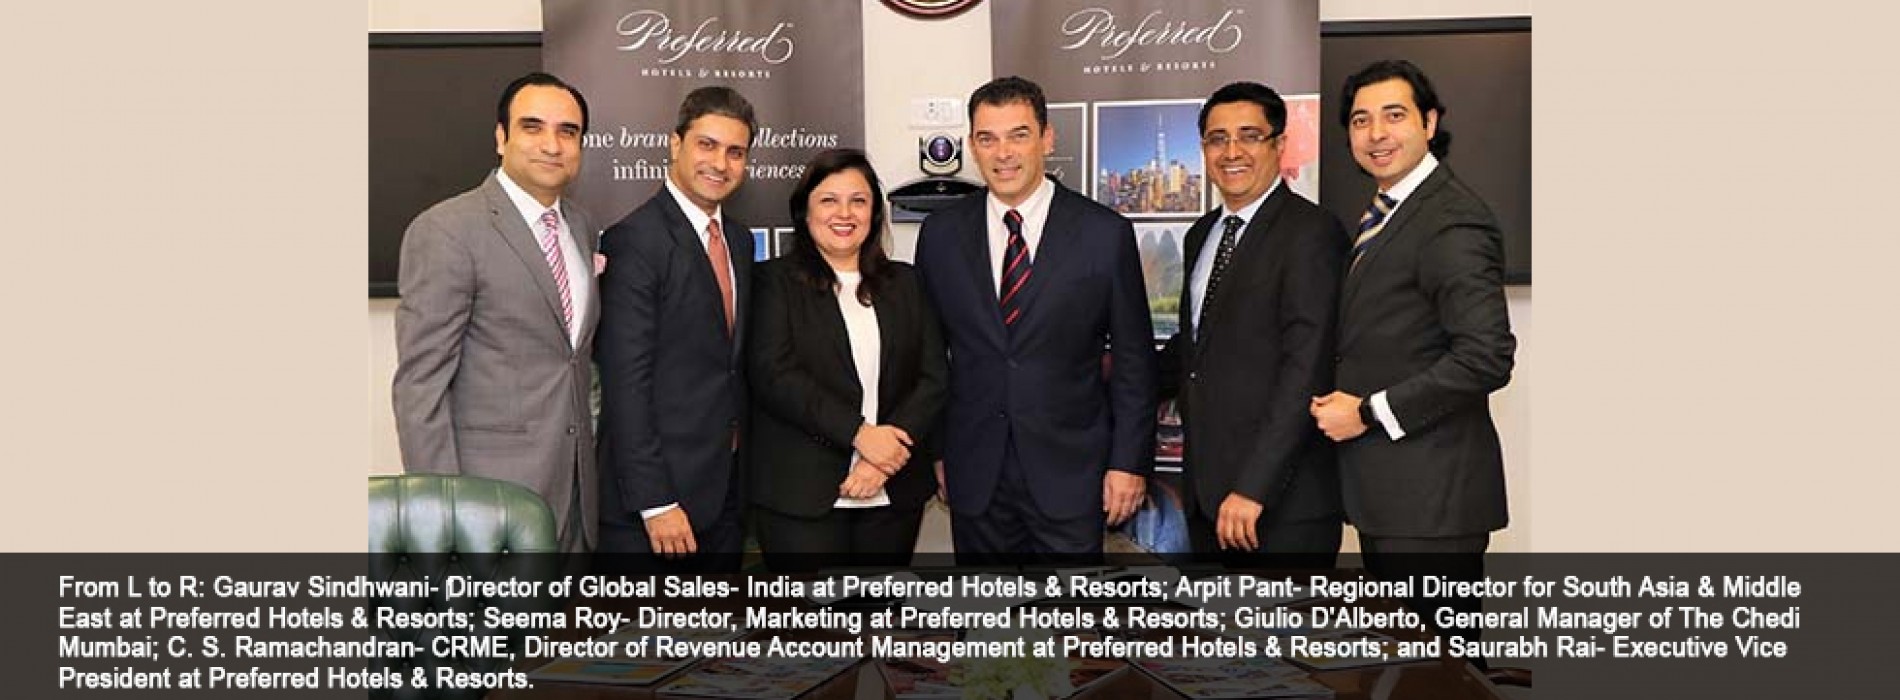 Preferred Hotels & Resorts signs Strategic Partnership with GHM for The Chedi Mumbai